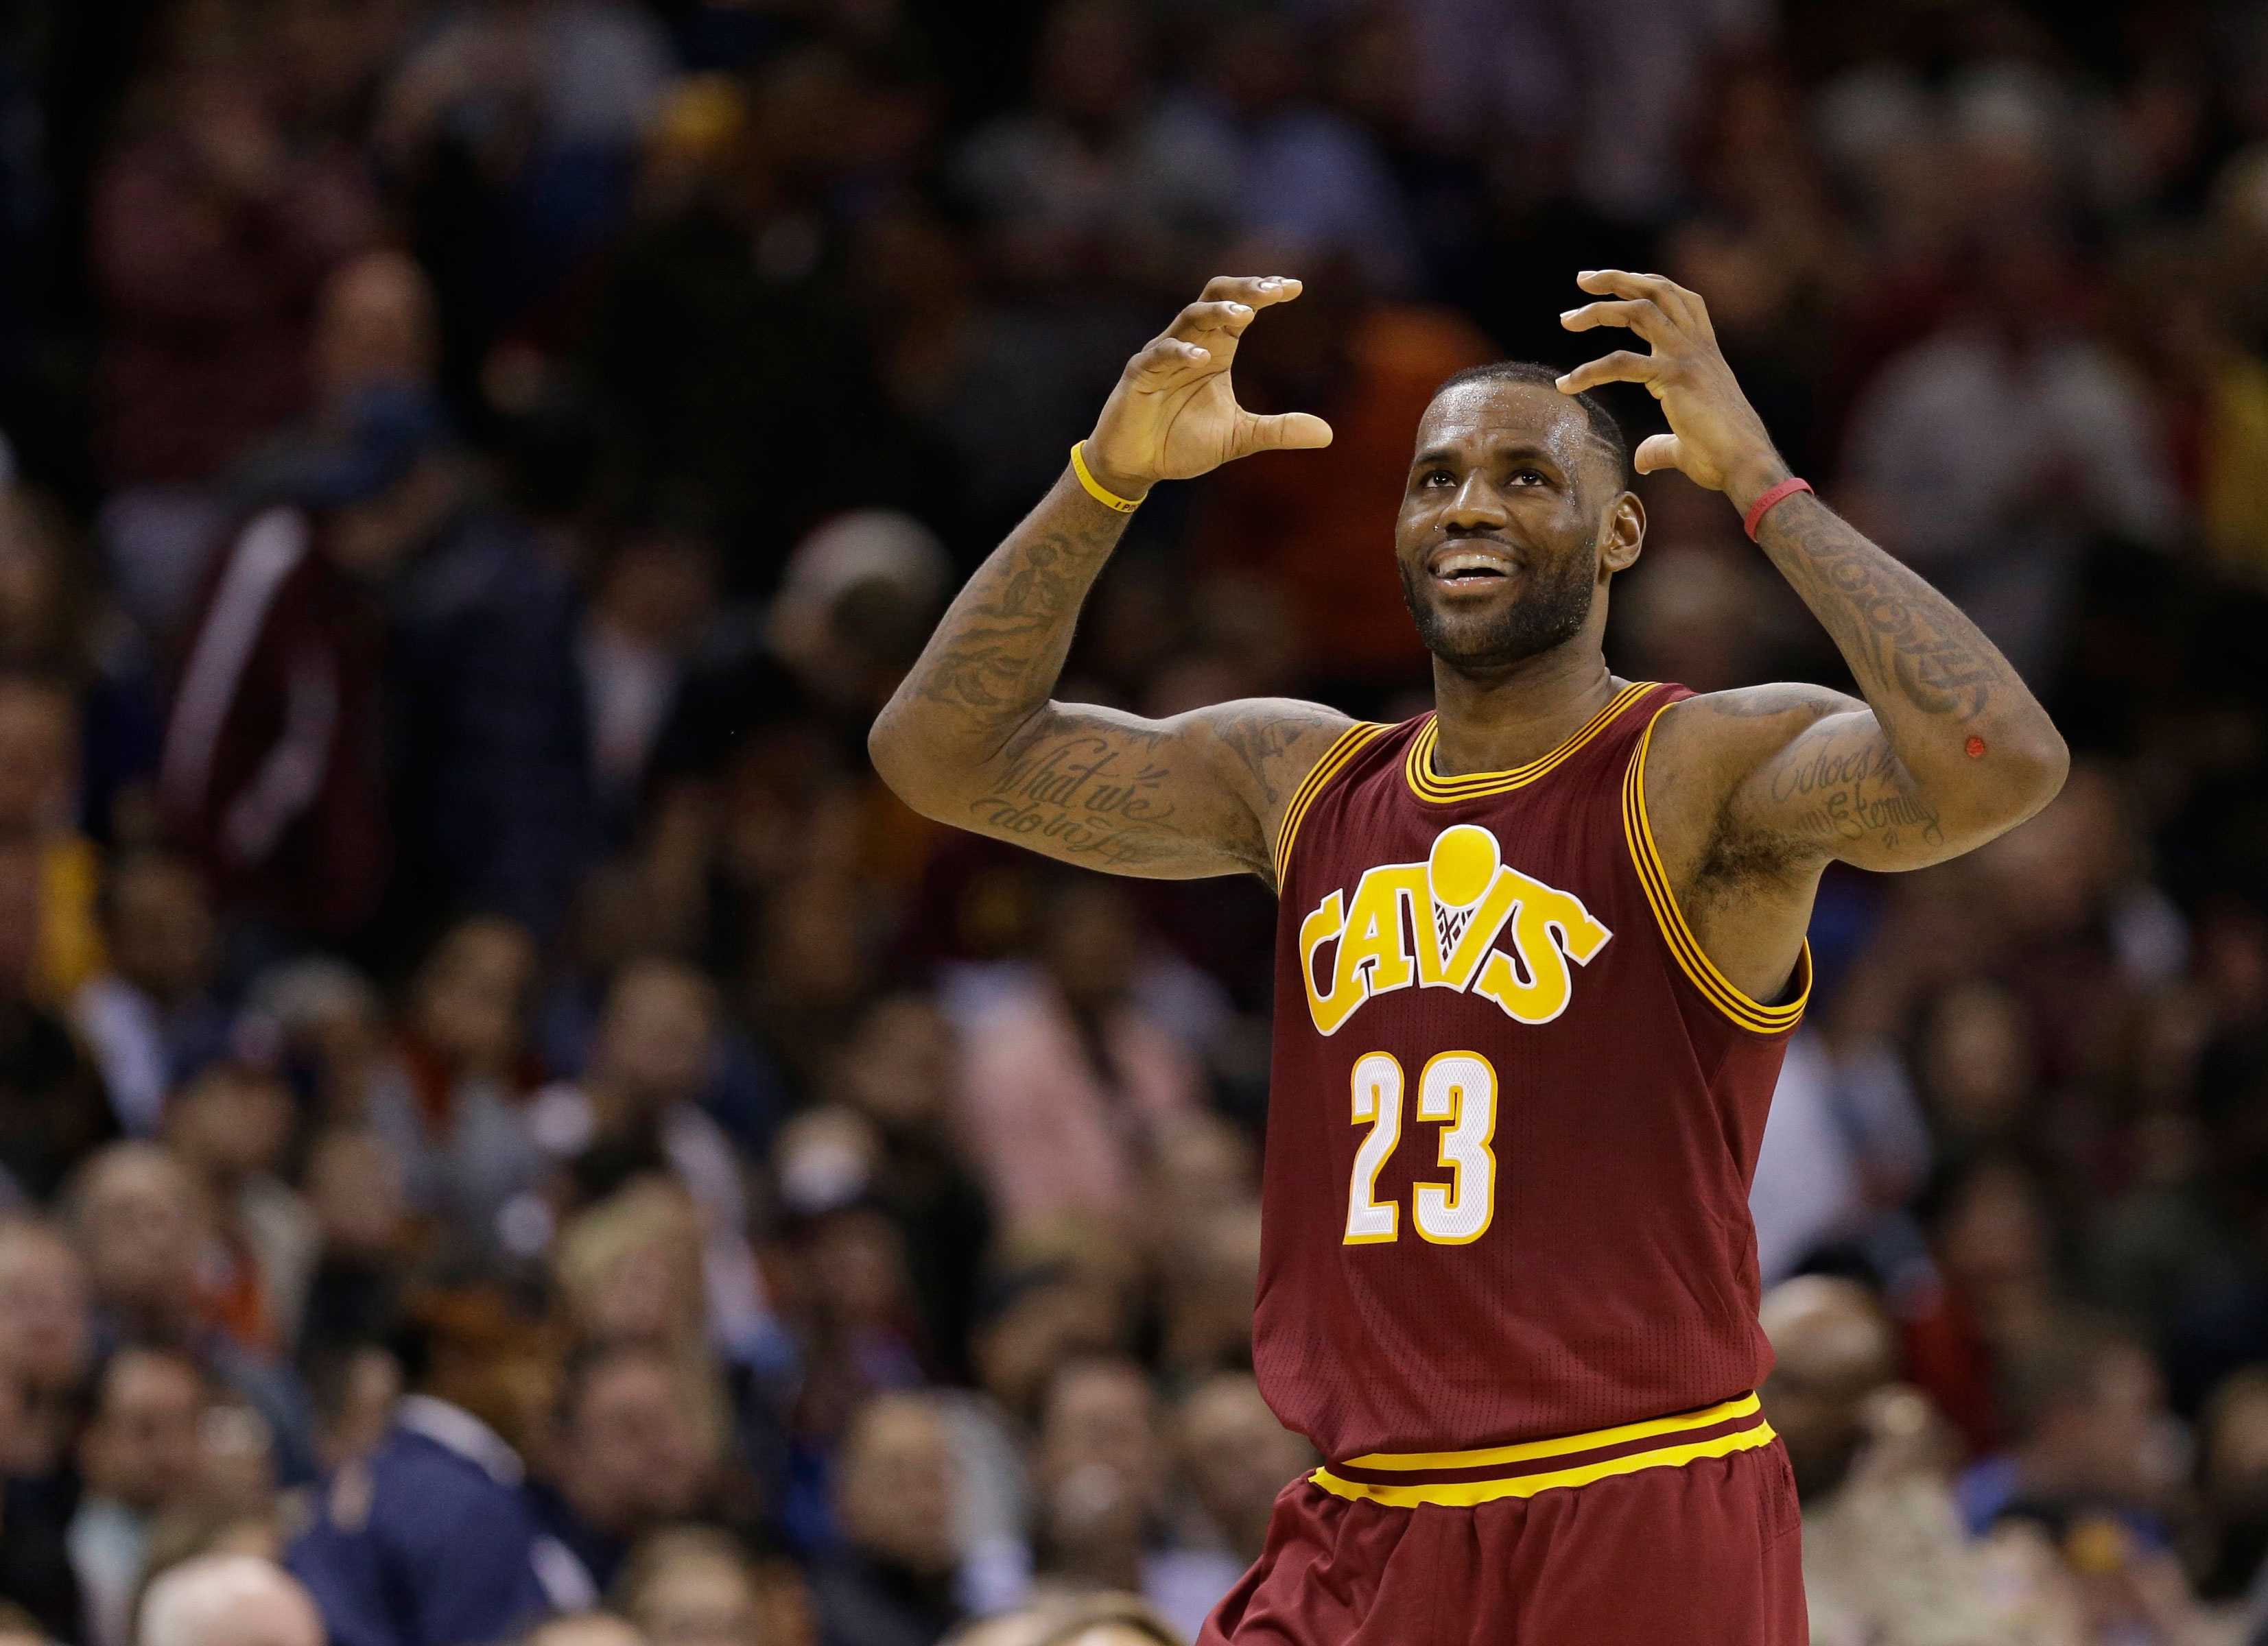 LeBron James becomes youngest player in history to score 30,000 points